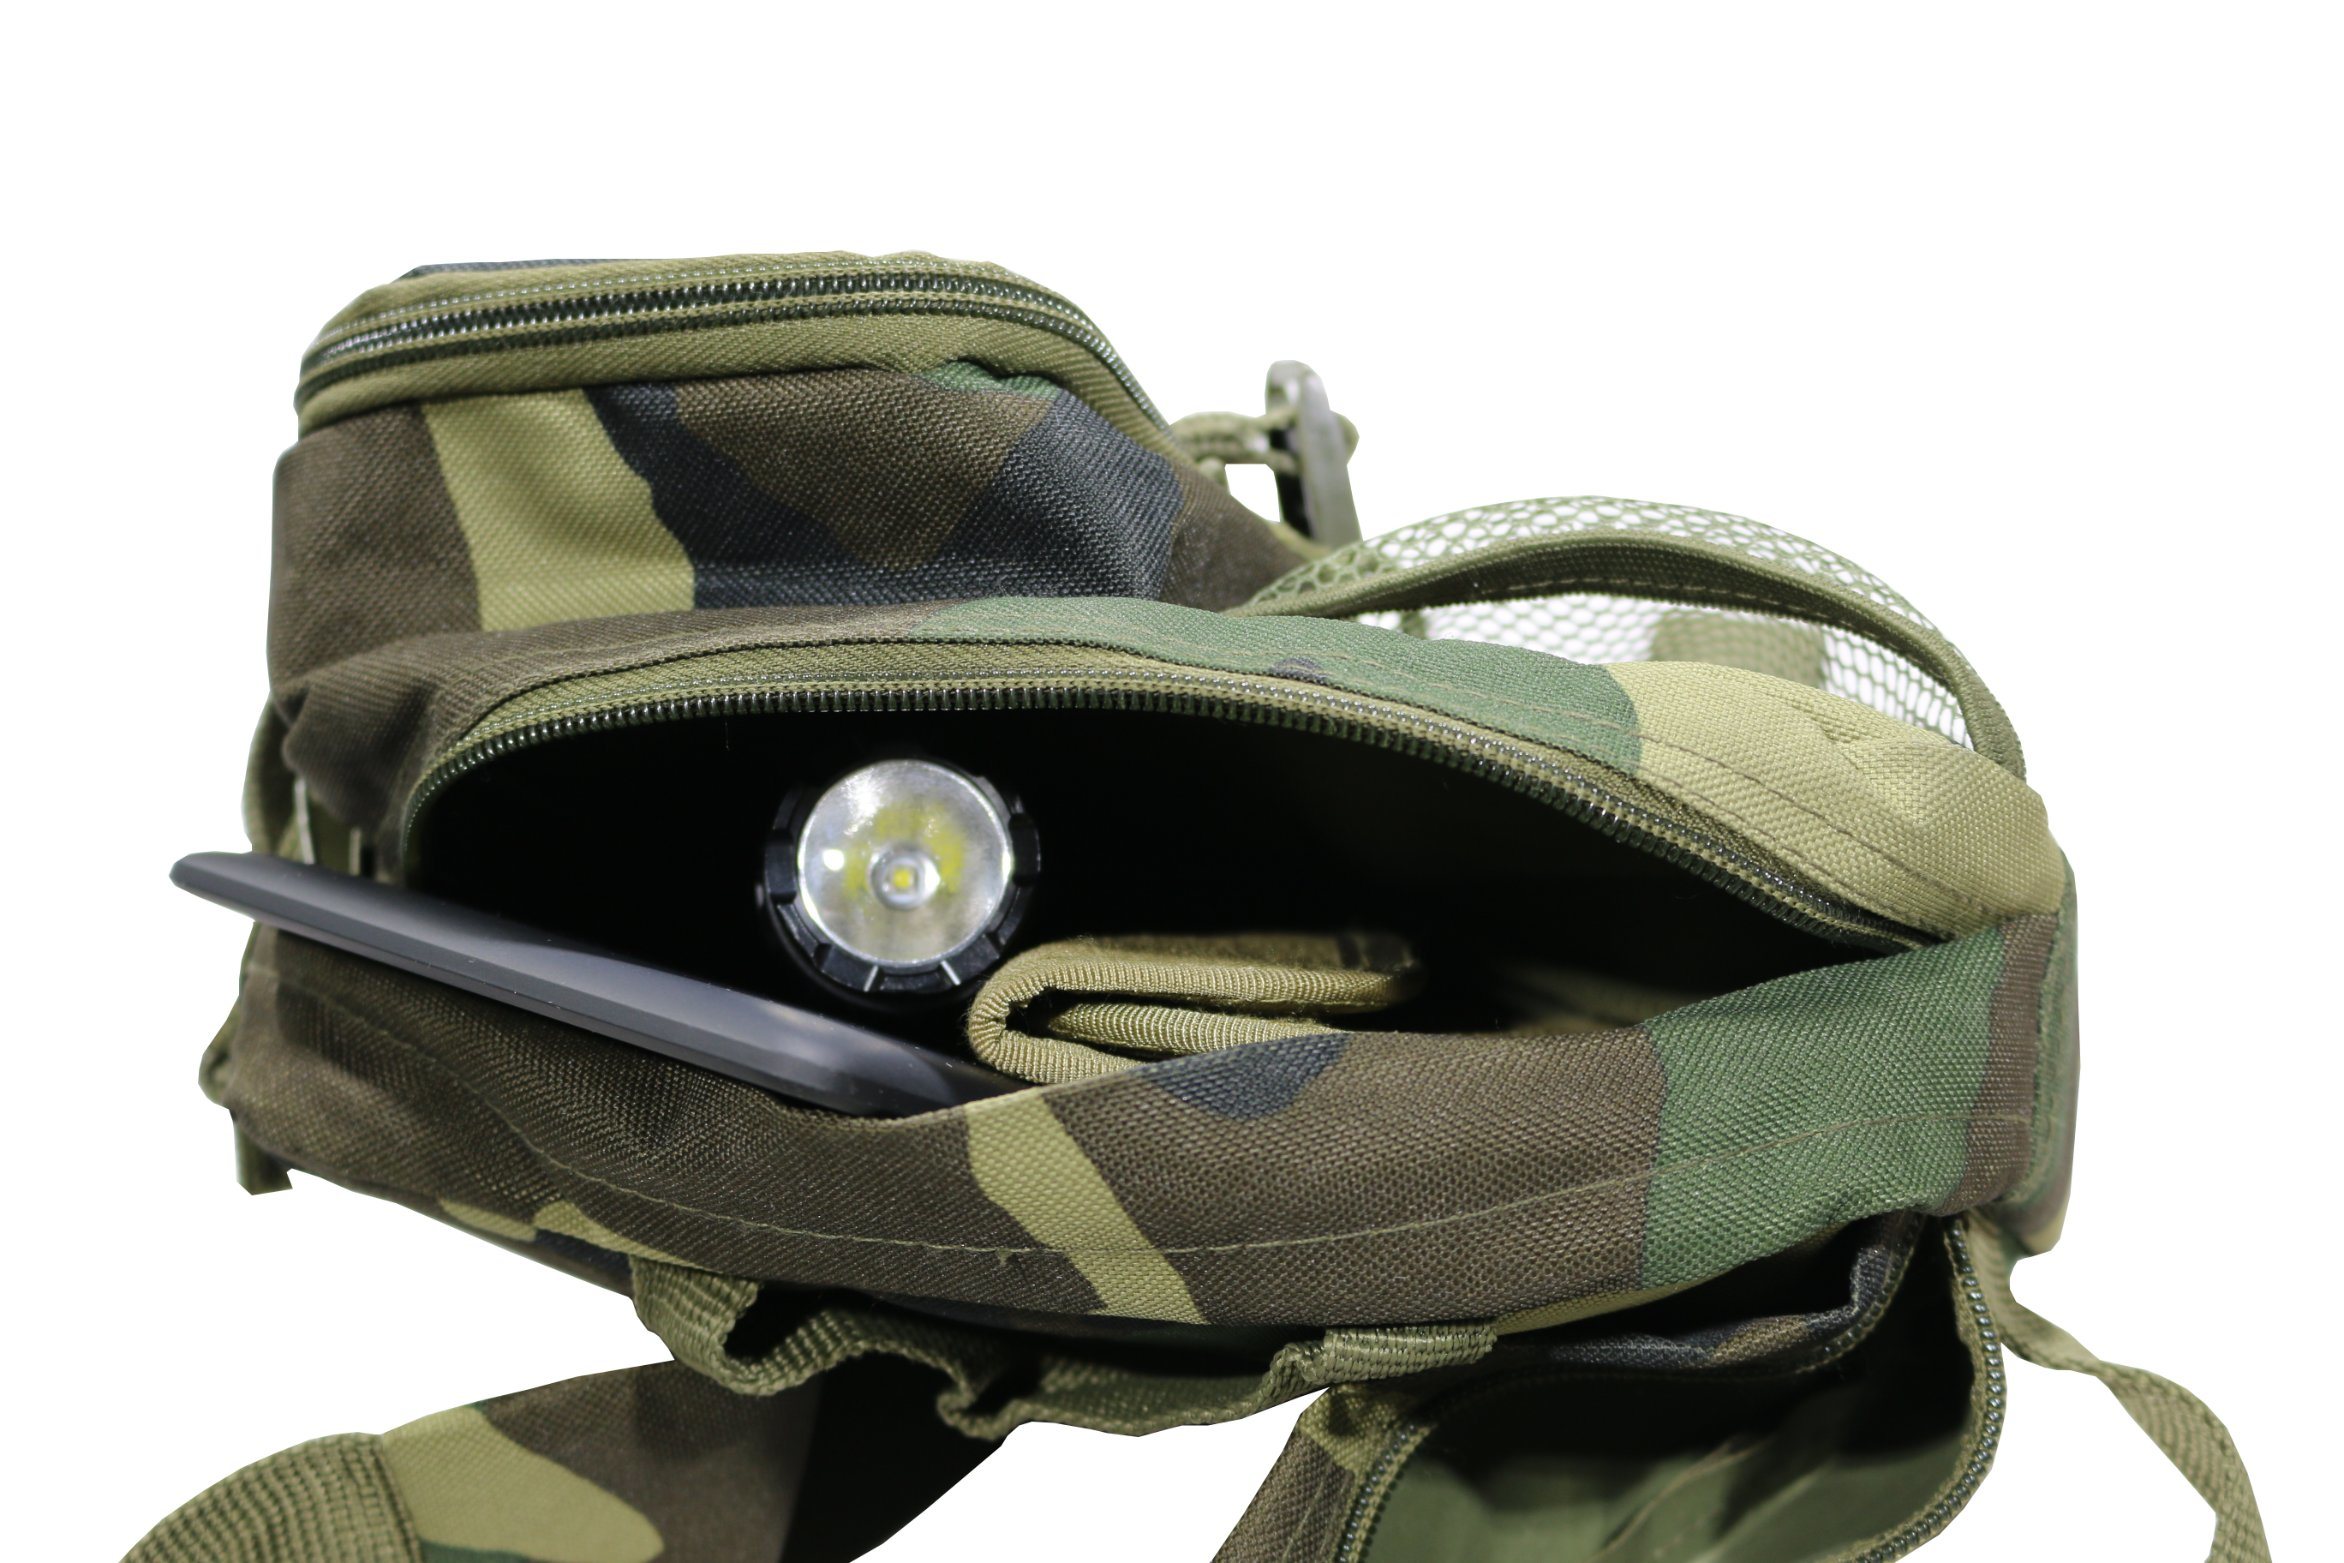 Military Tactical Waist Bag with Bottle Holder